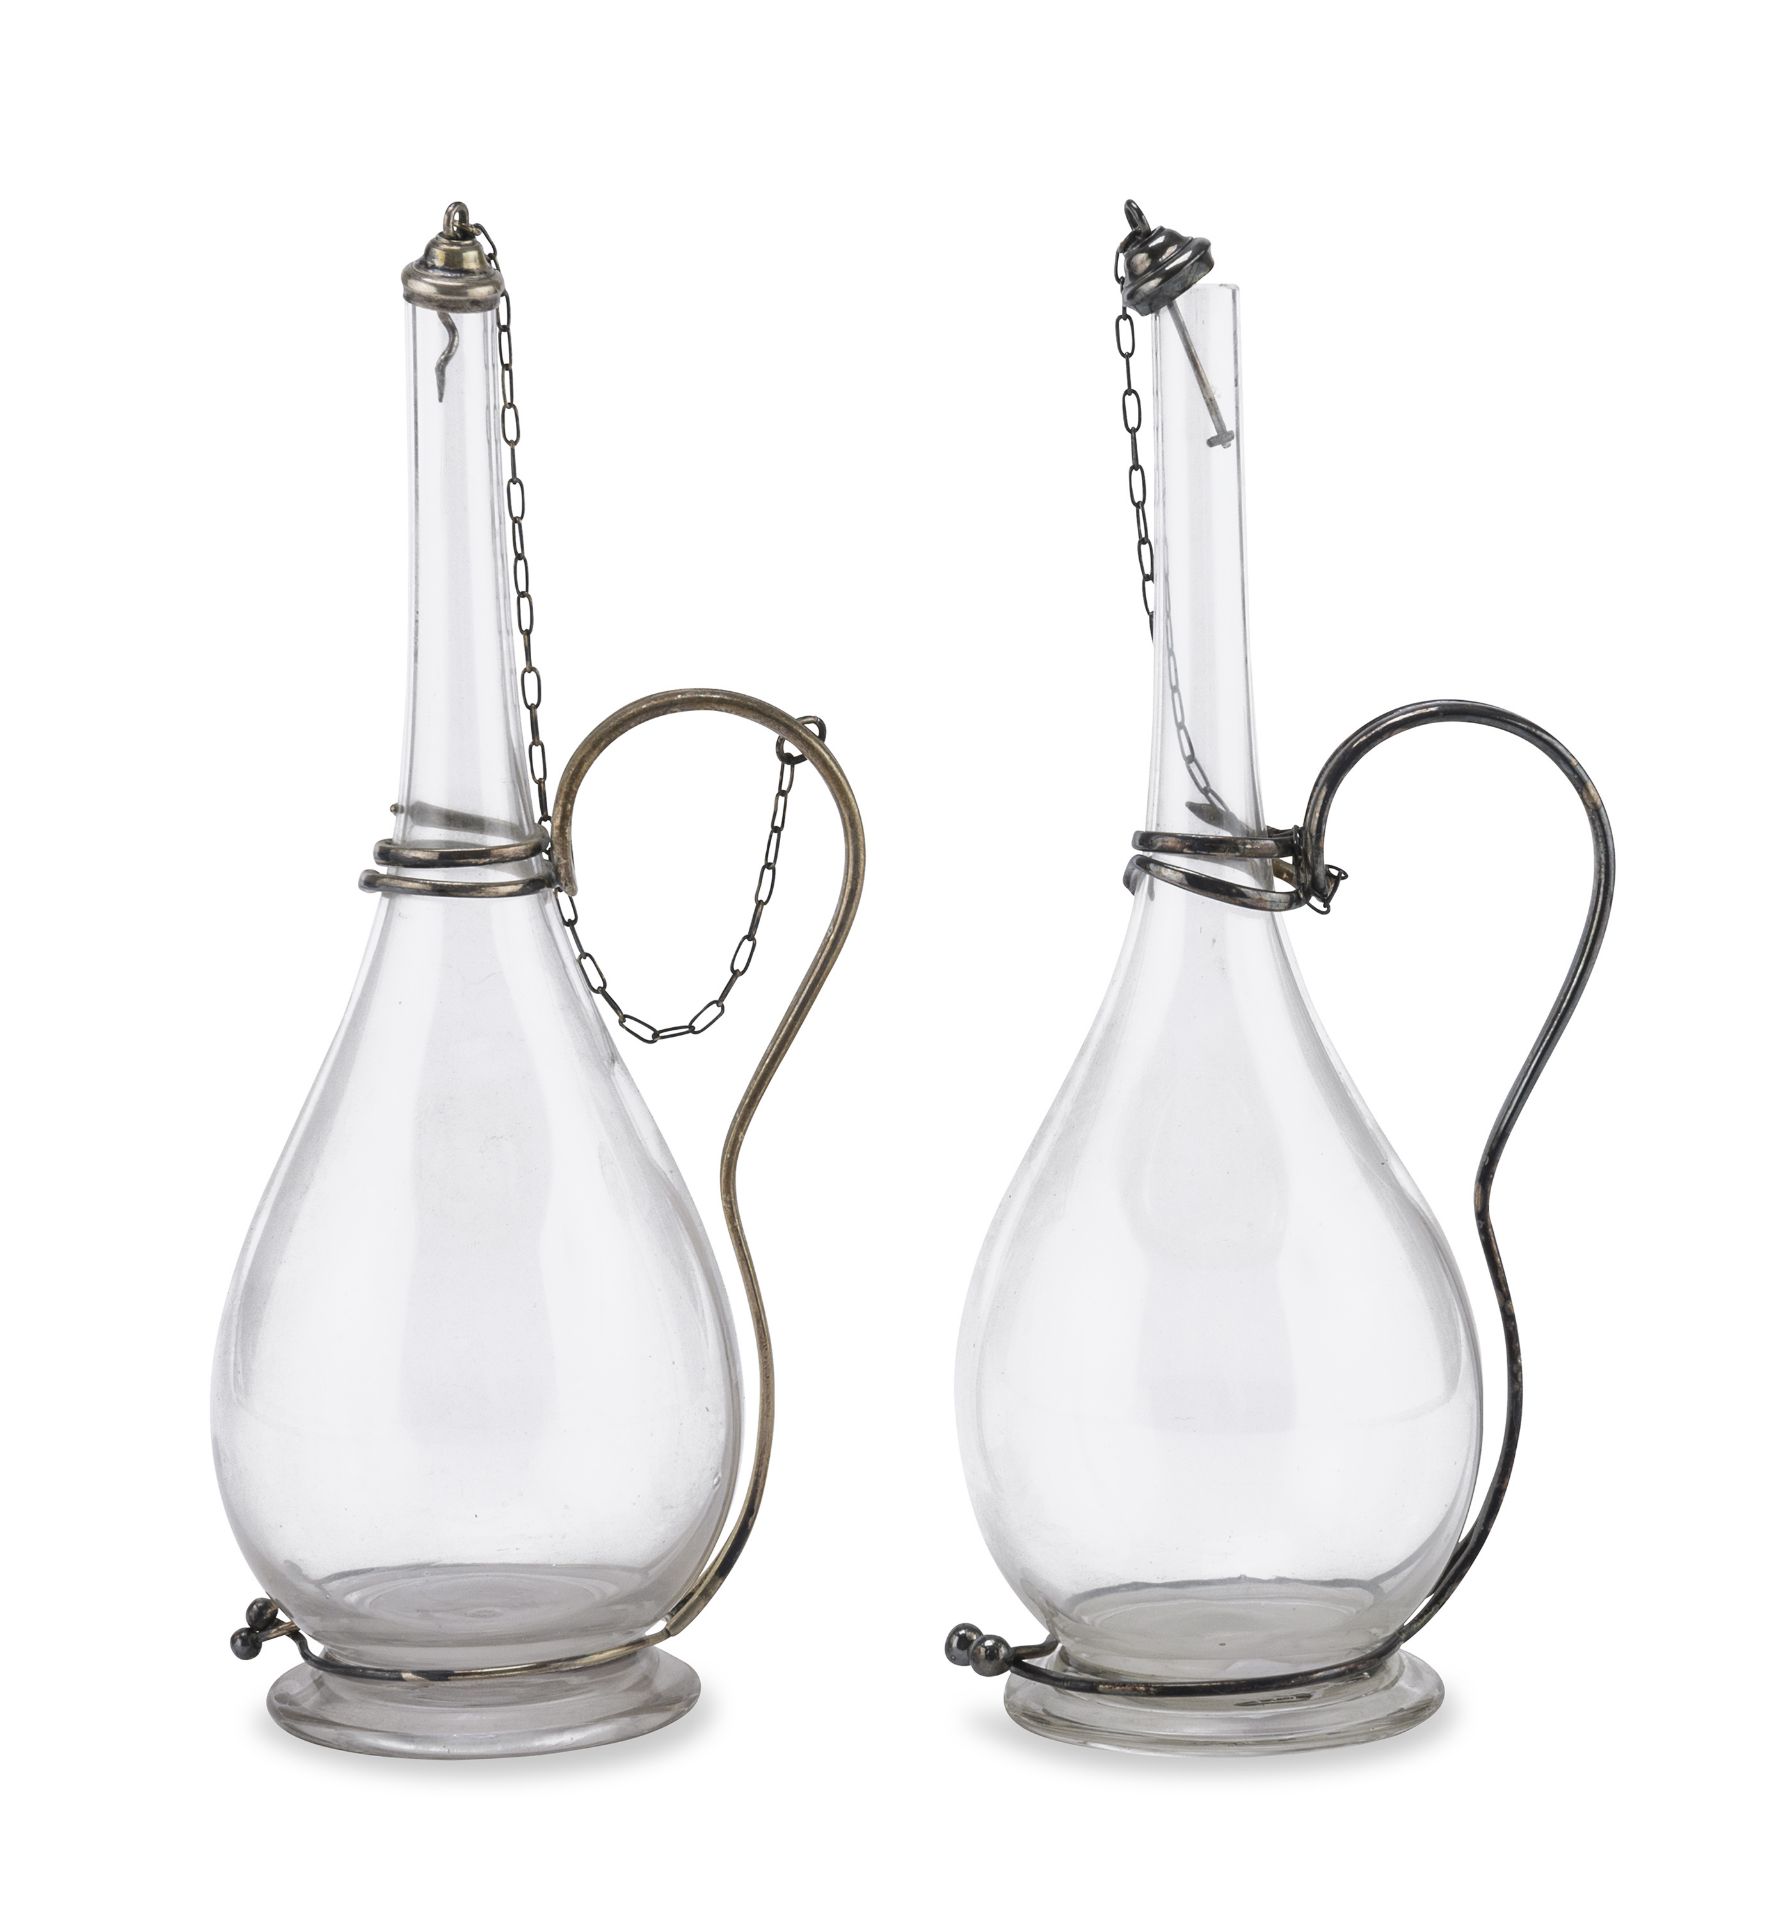 PAIR OF OIL BOTTLES EARLY 20TH CENTURY